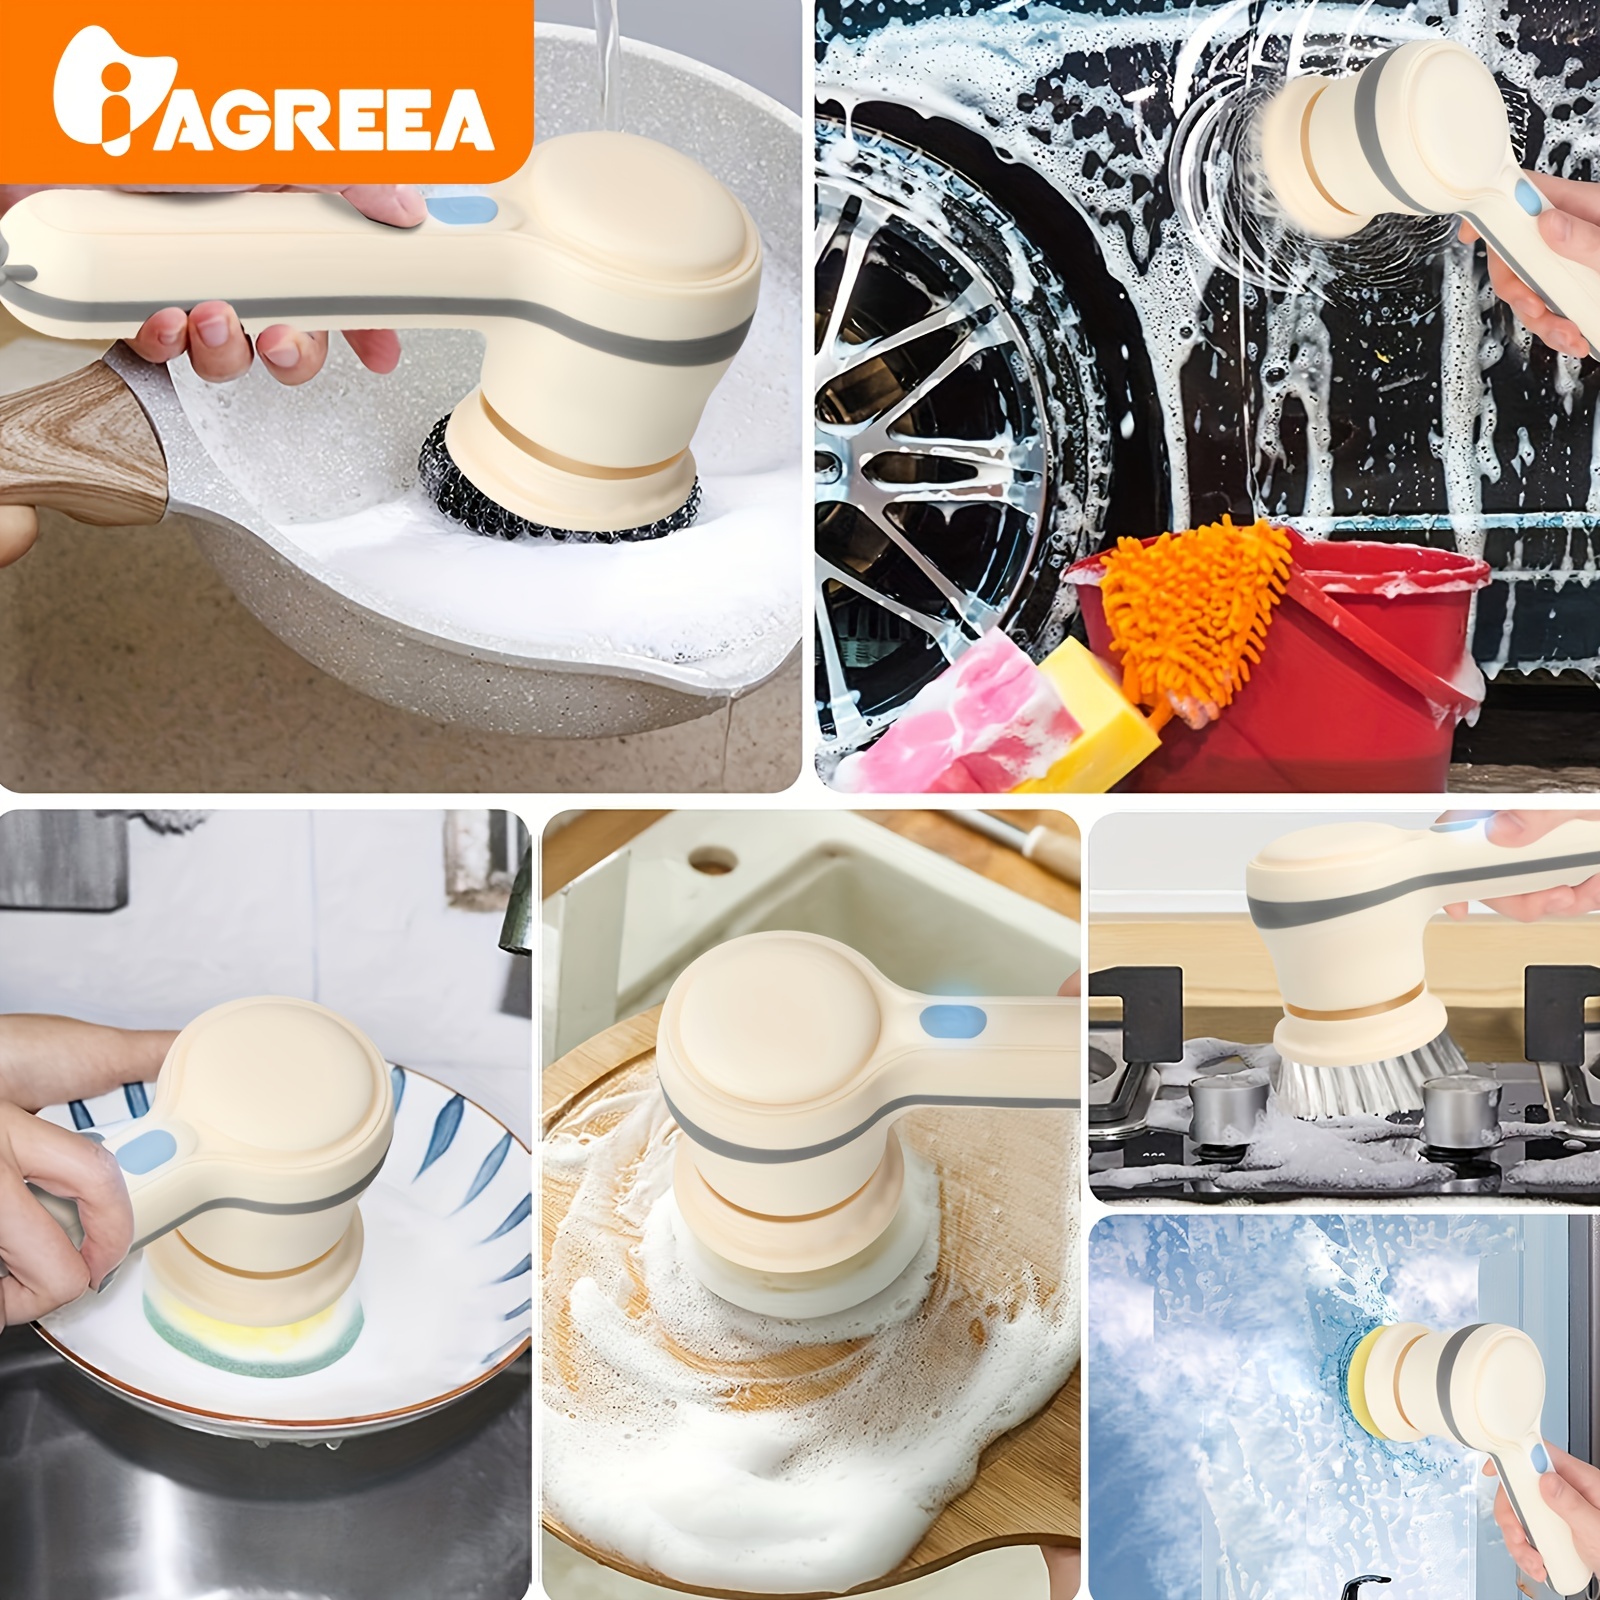 1pc Electric Spin Scrubber, Cordless Electric Cleaning Kitchenware